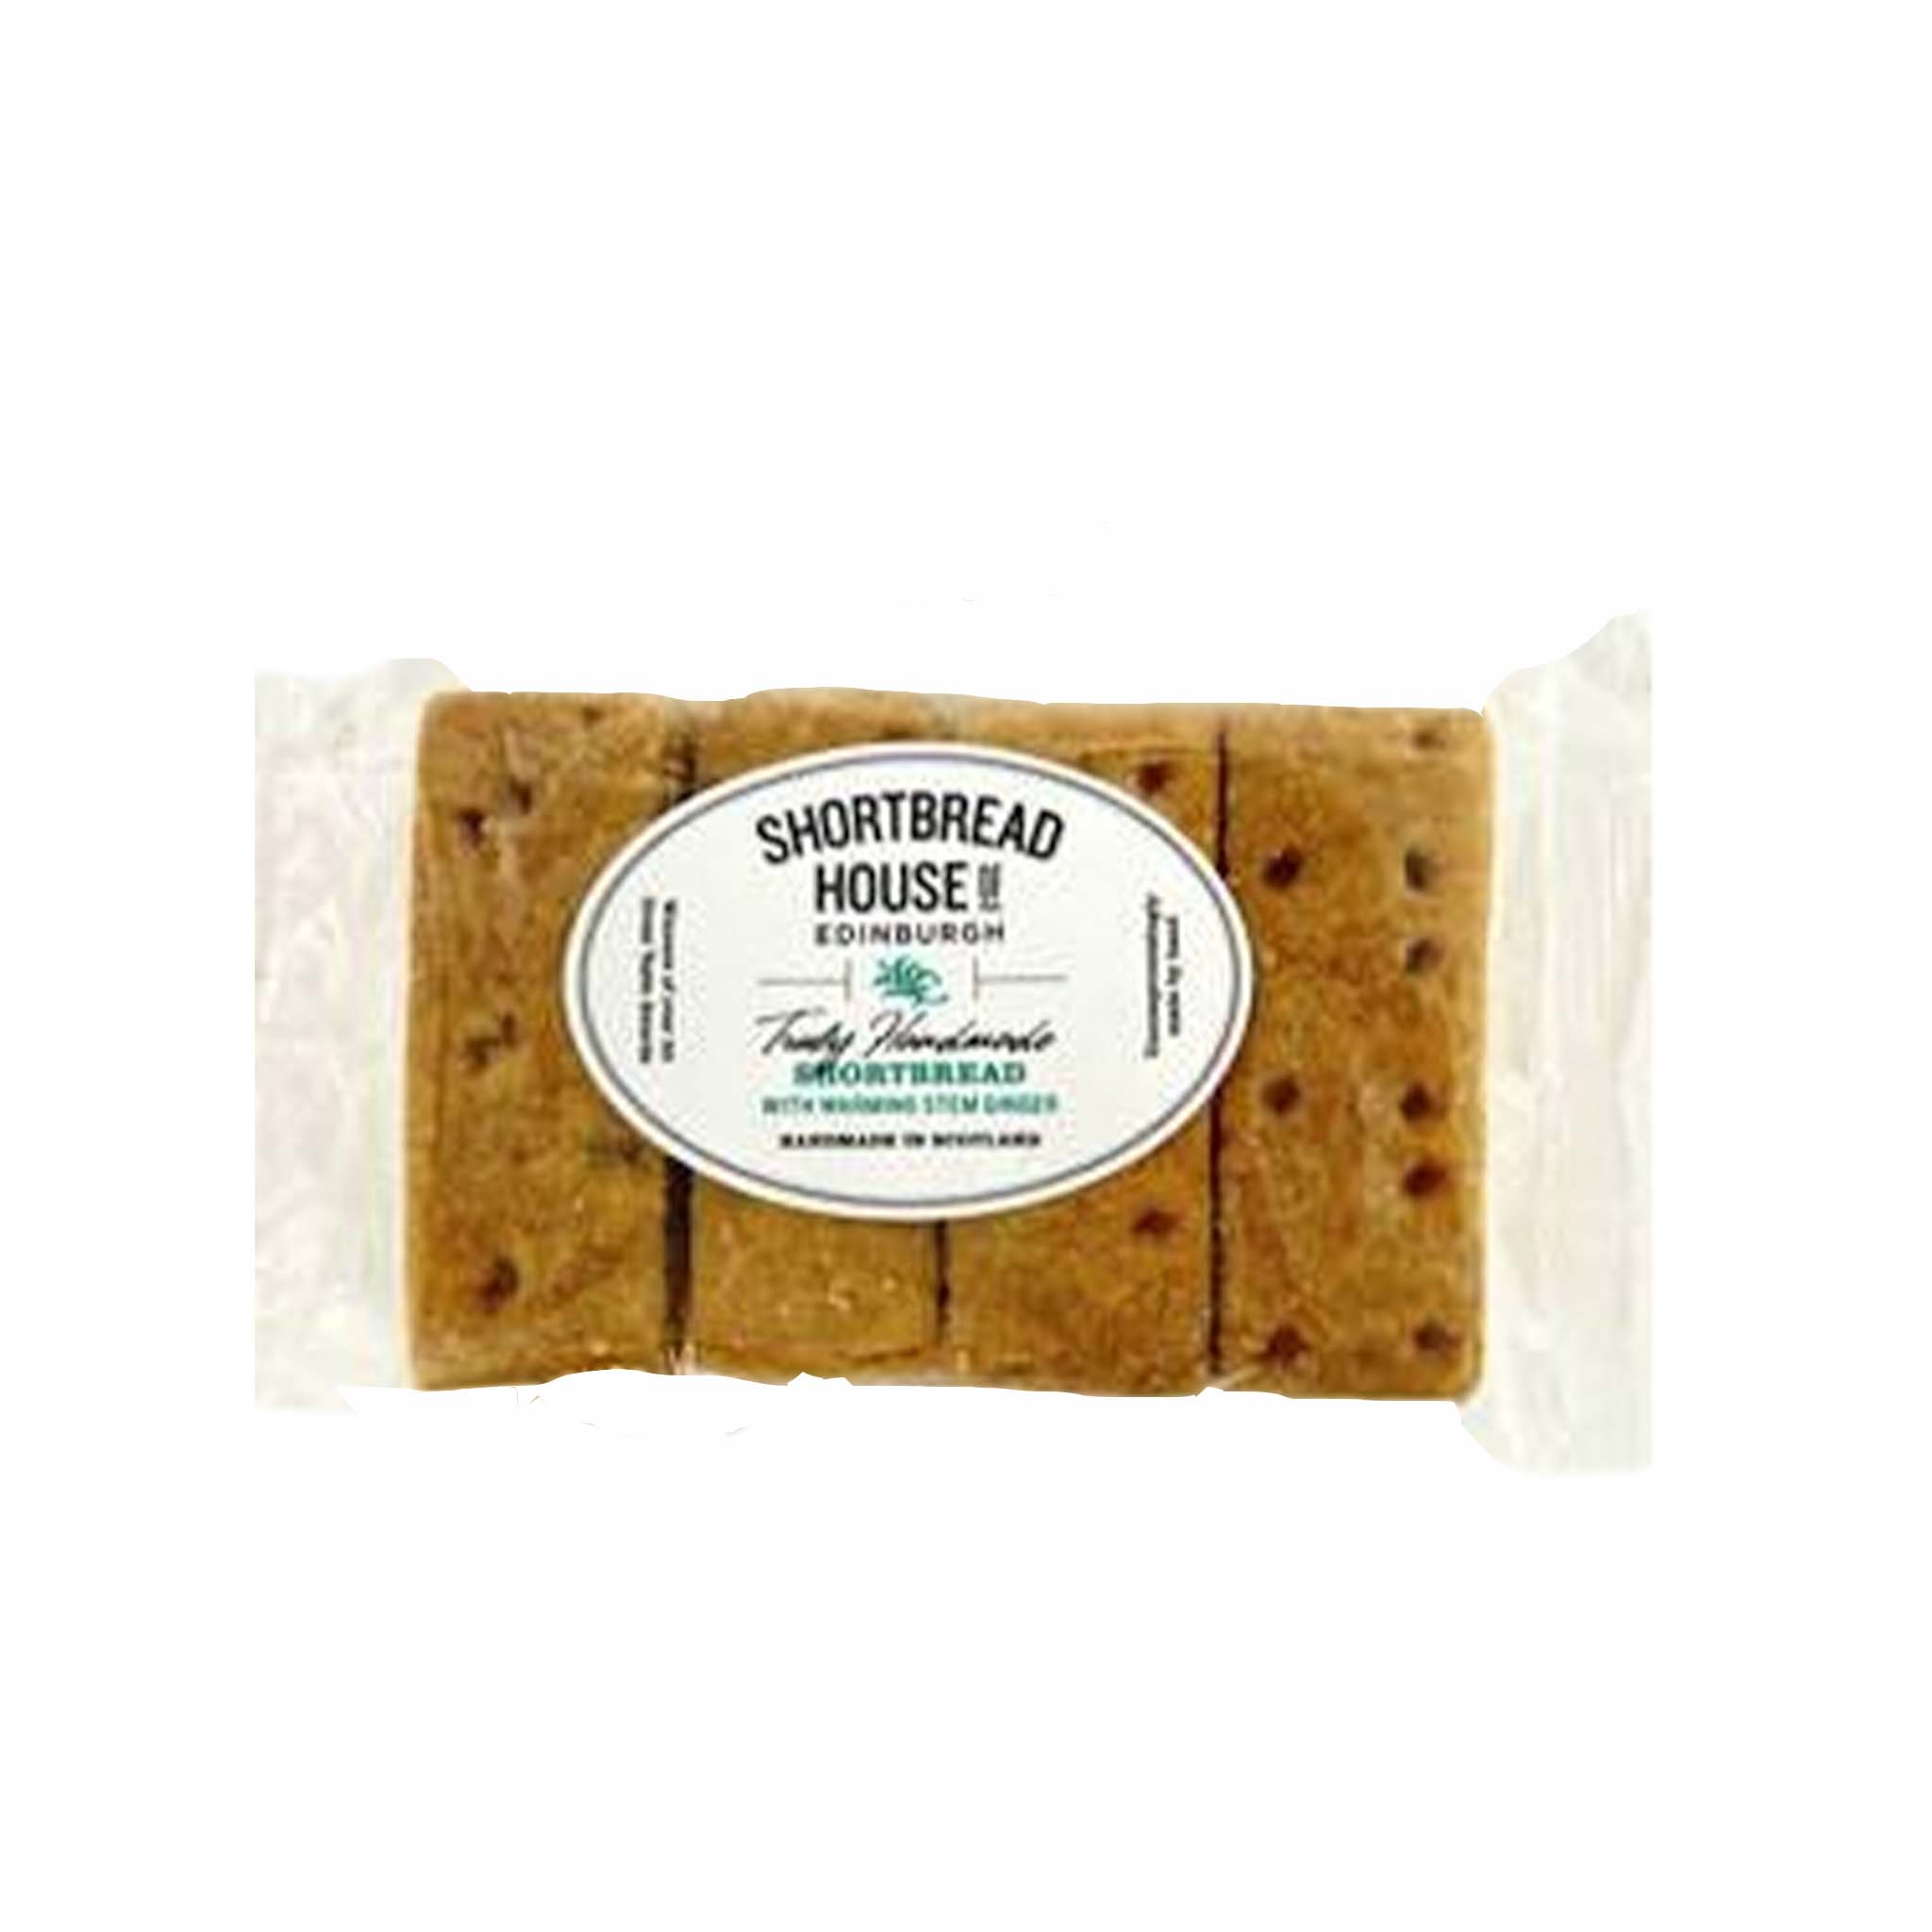 SHORTBREAD HOUSE FINGERS WITH GINGER 6oz